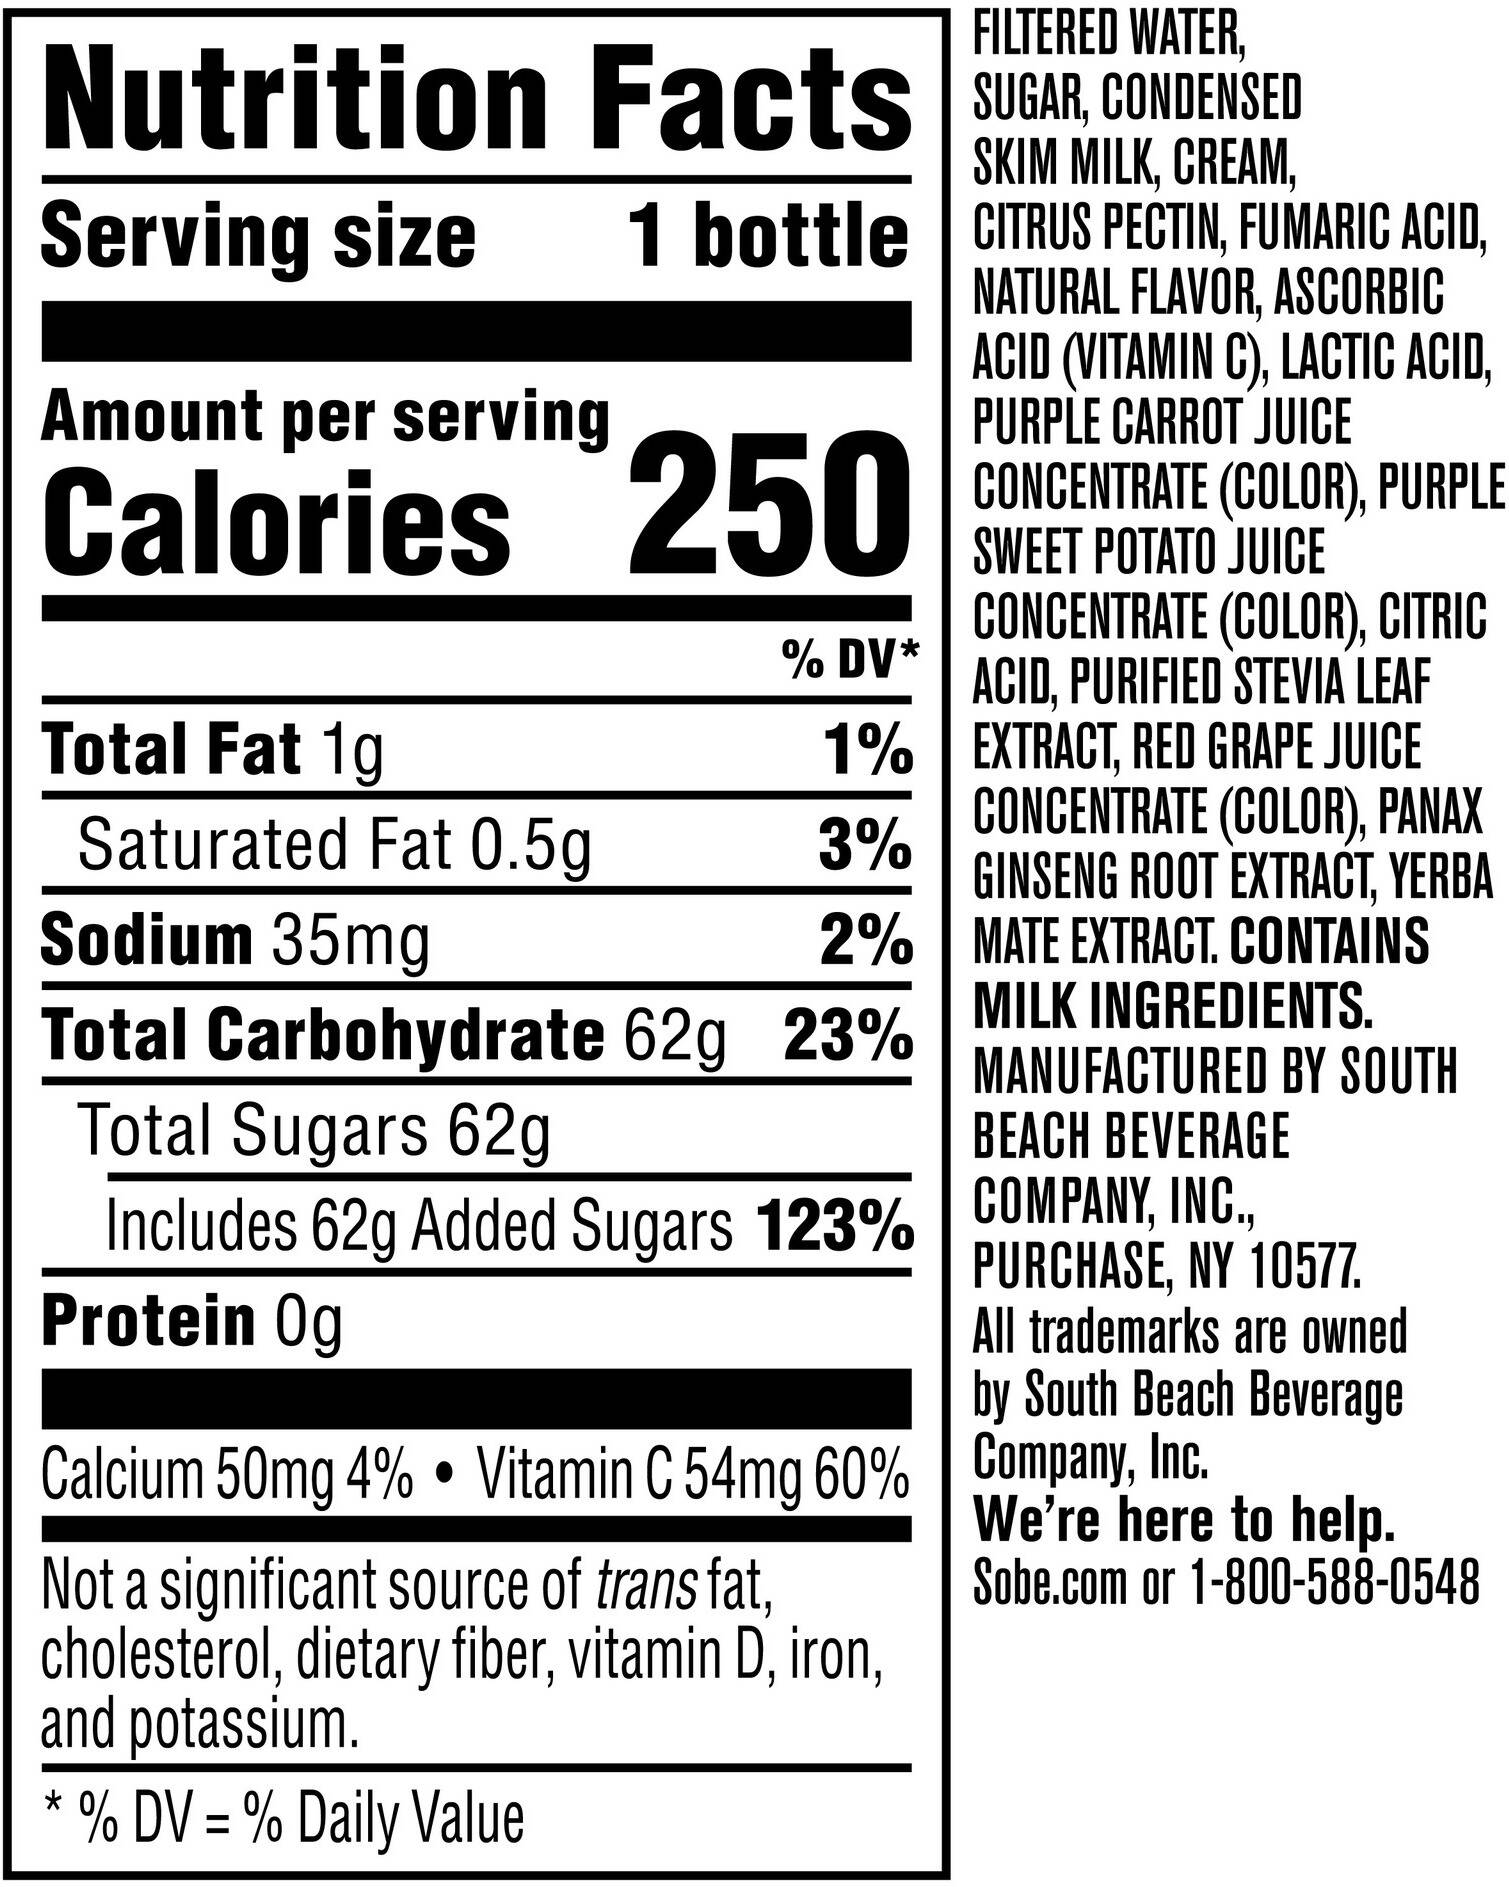 Image describing nutrition information for product SoBe Strawberry Banana